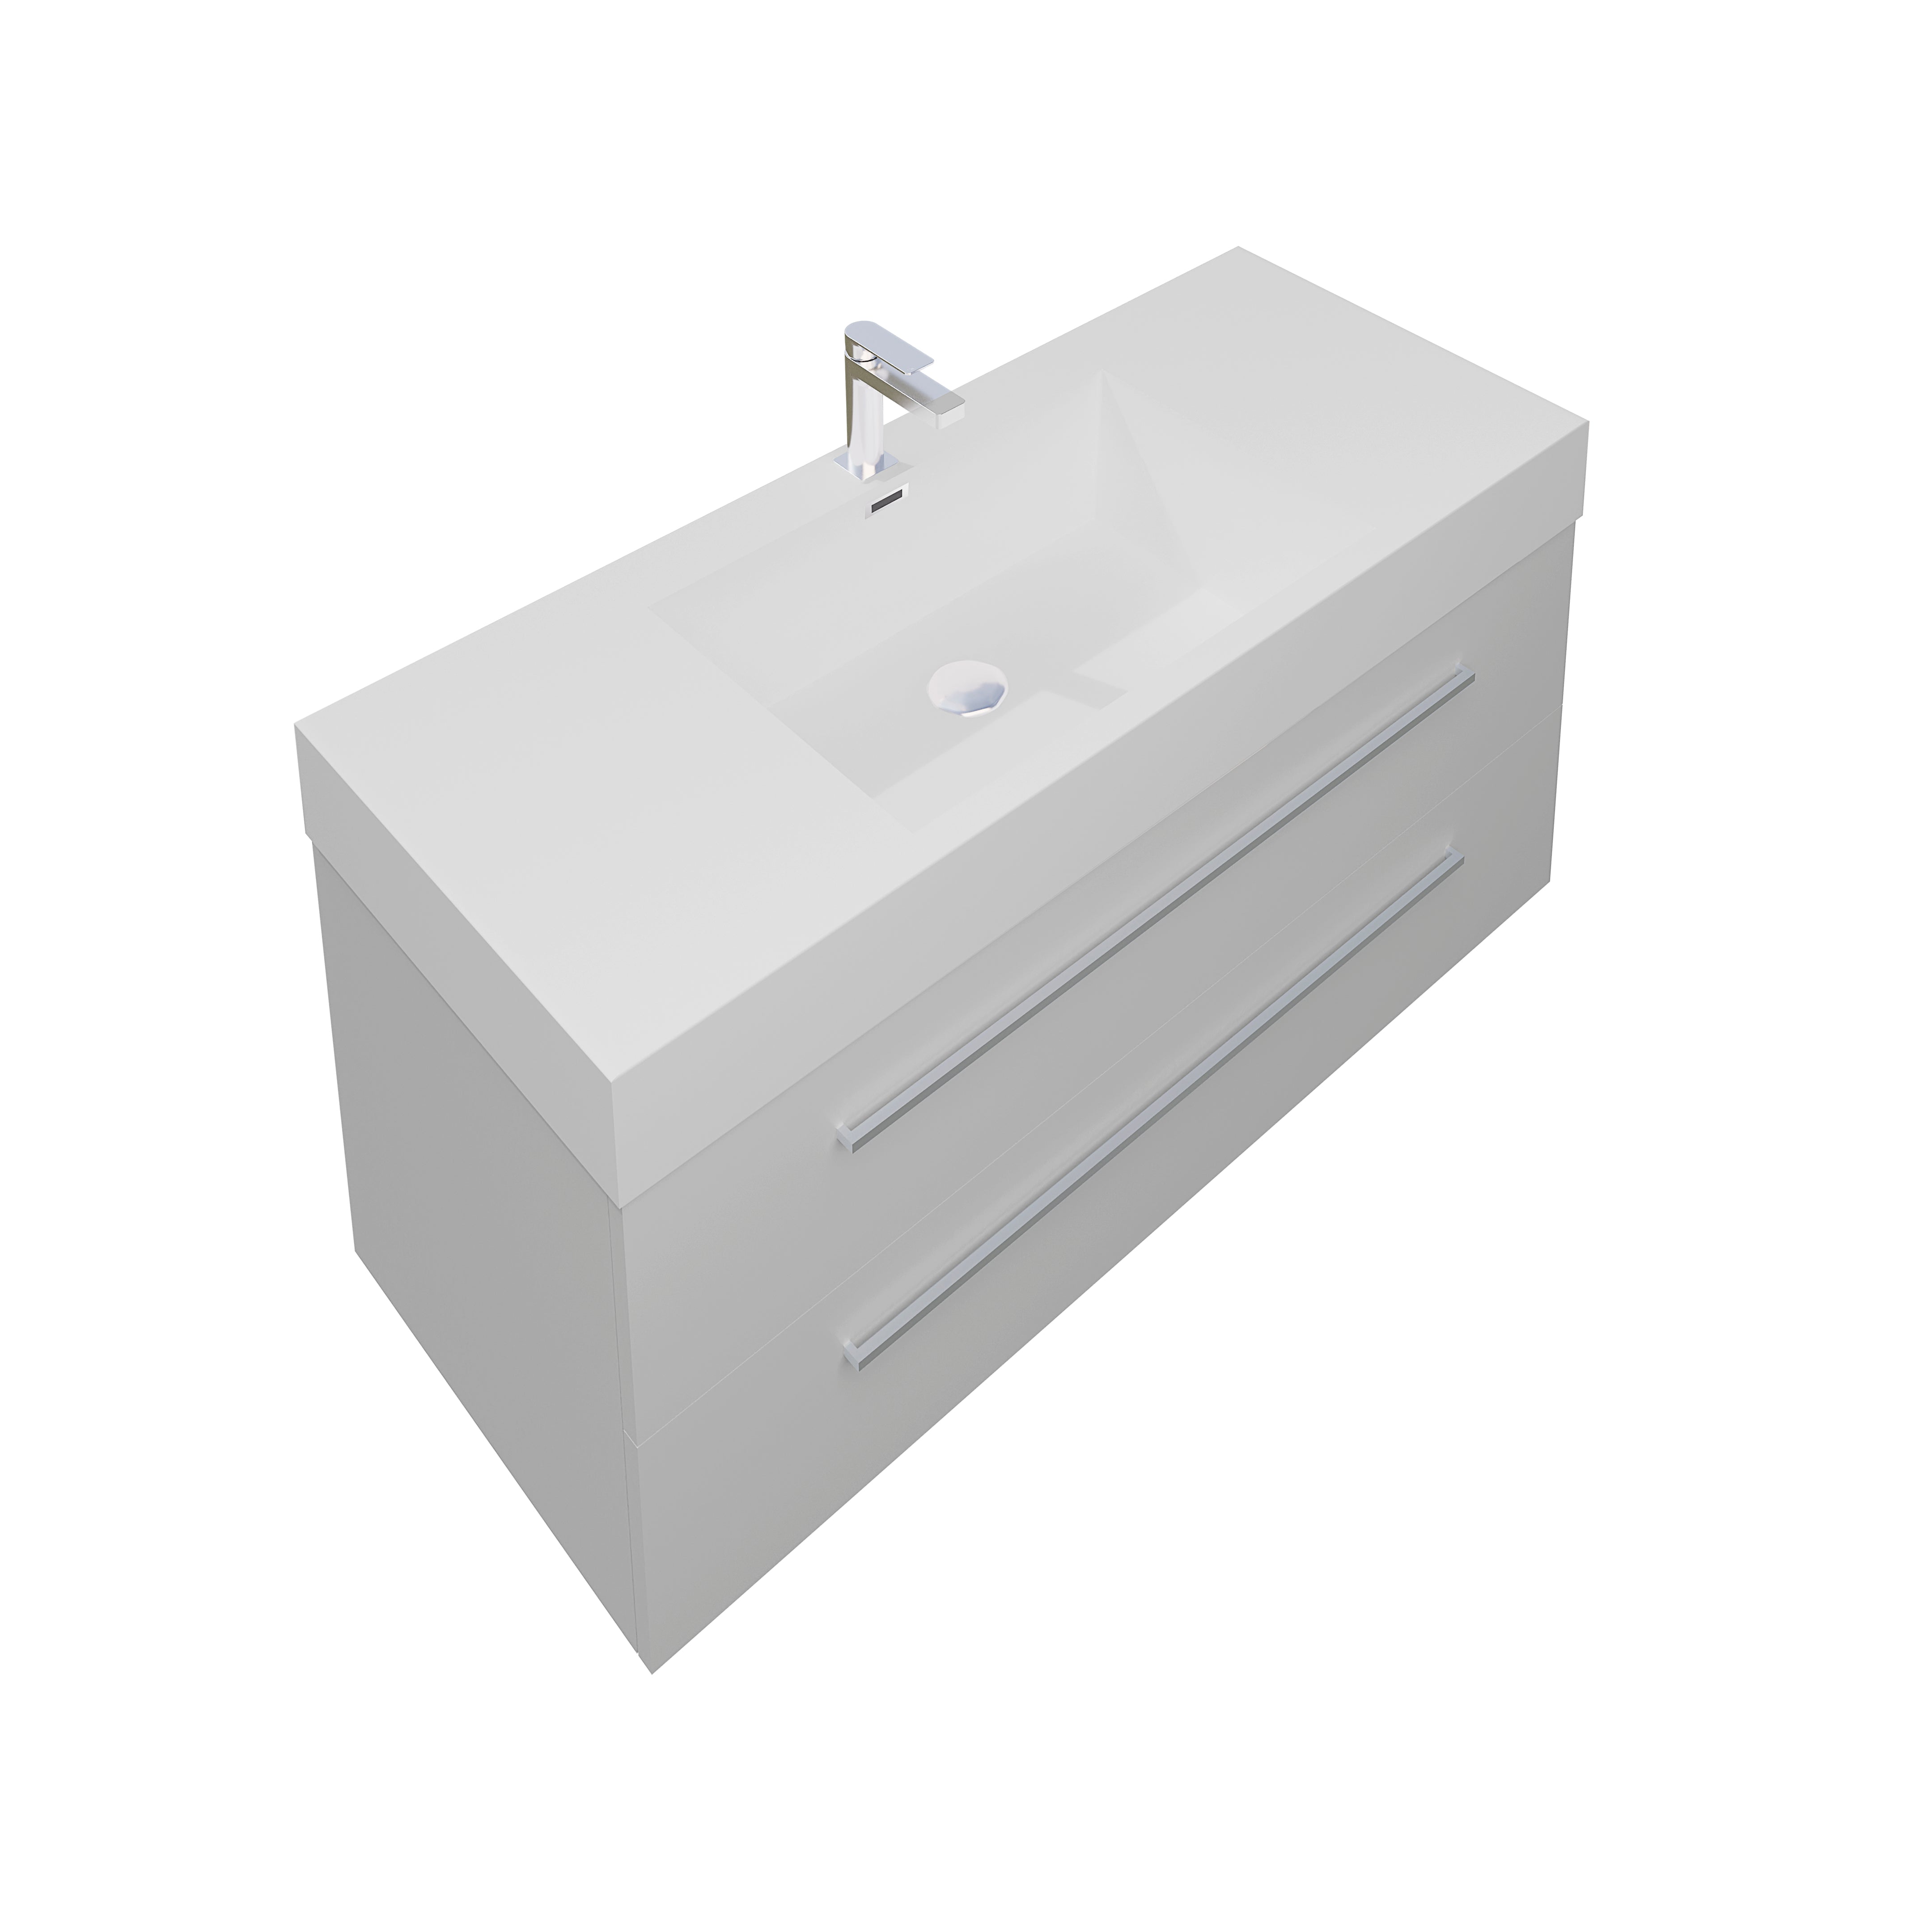 Maya 59 White High Gloss Cabinet, Square Cultured Marble Sink, Wall Mounted Modern Vanity Set